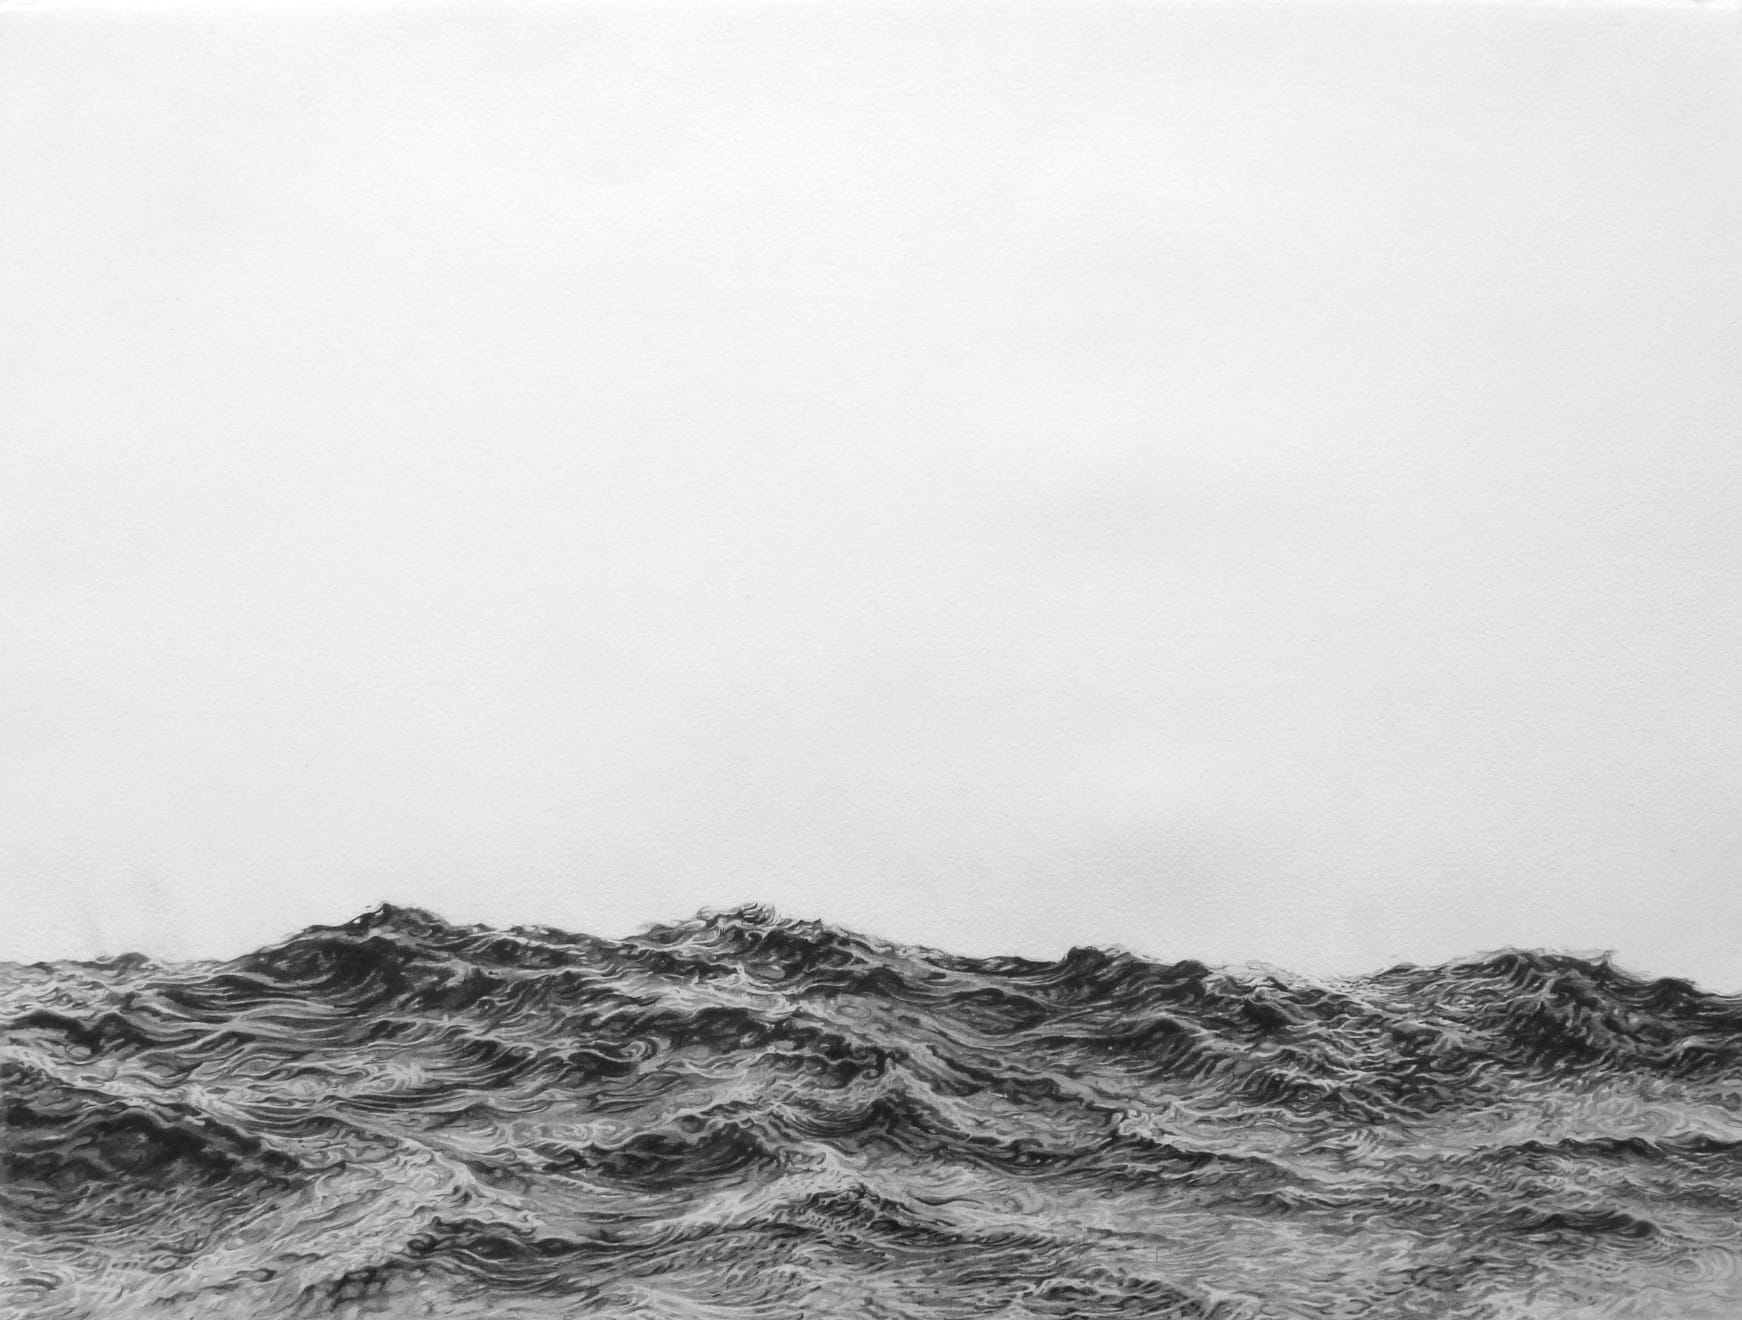 Sophie Bray Swell Pencil on Paper Original Dark Timber Frame 60 x 45 cm AUD $1200 GBP £600